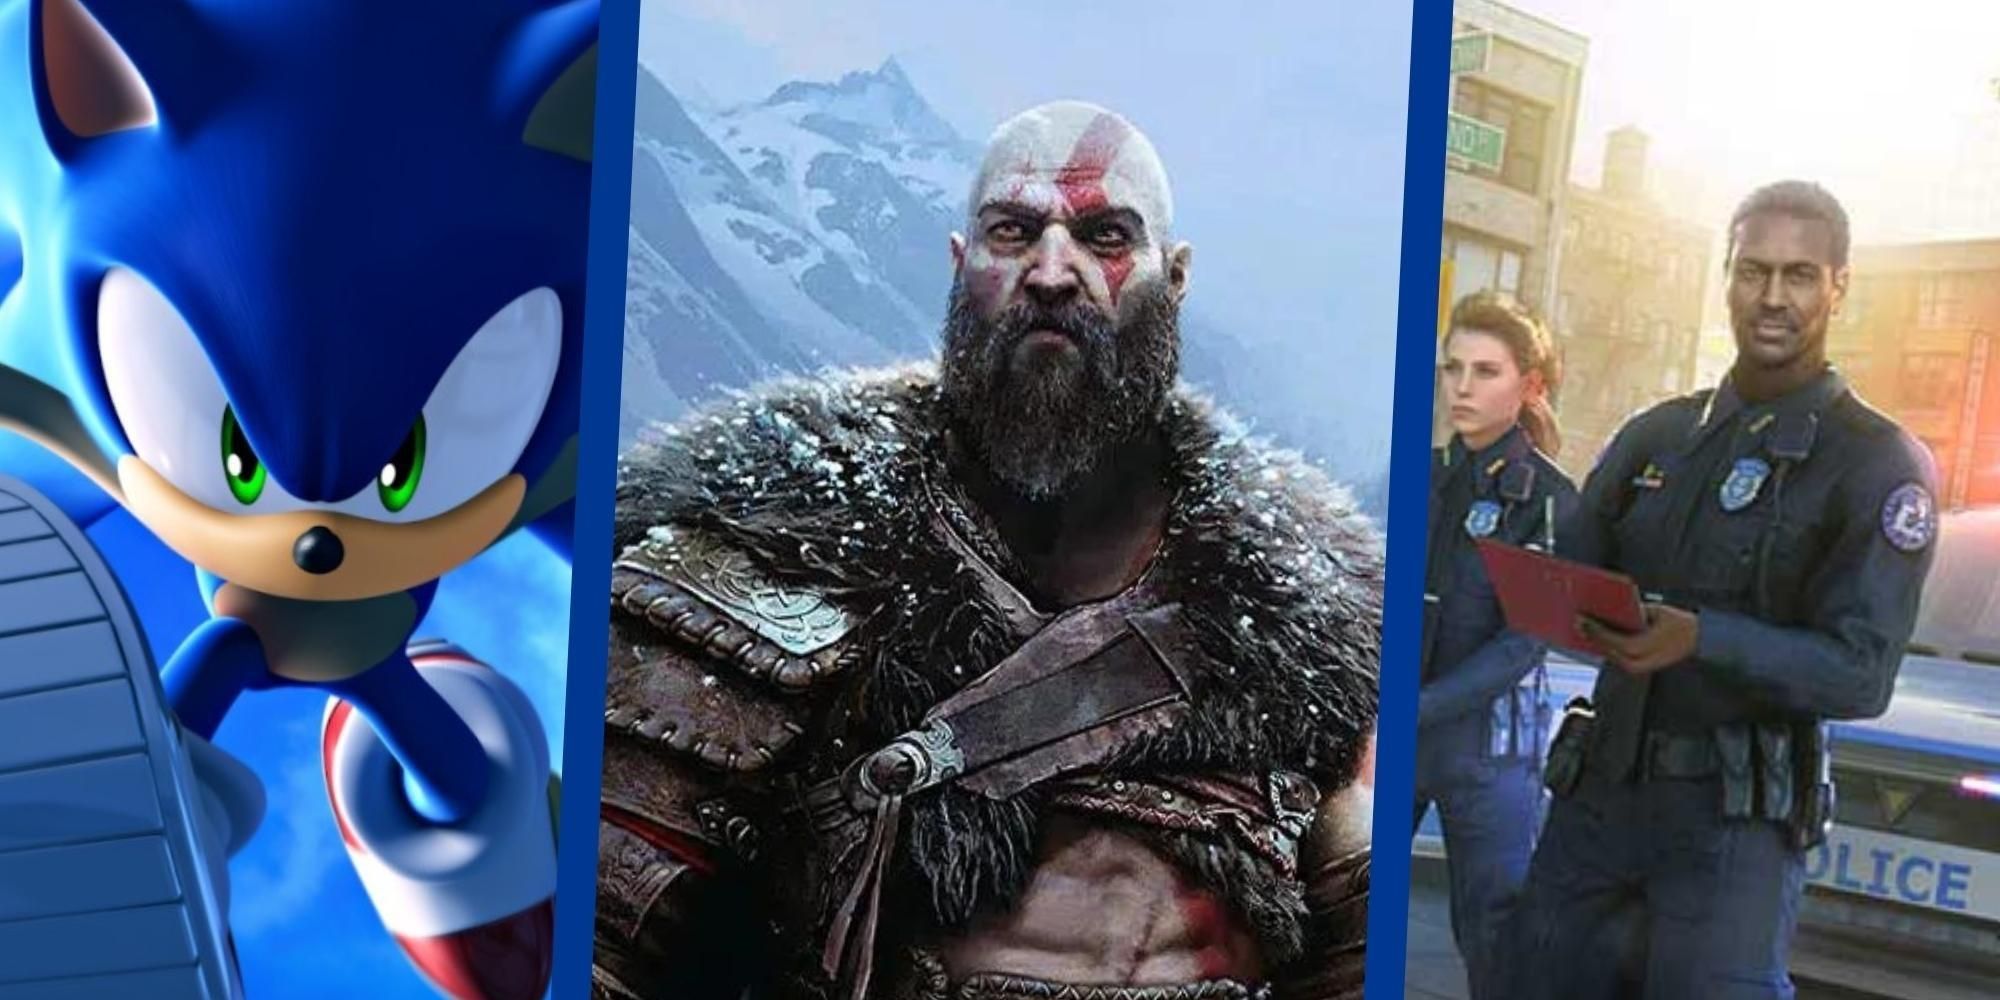 god of war ragnarok, sonic frontiers, and police simulator hit the playstation store this week